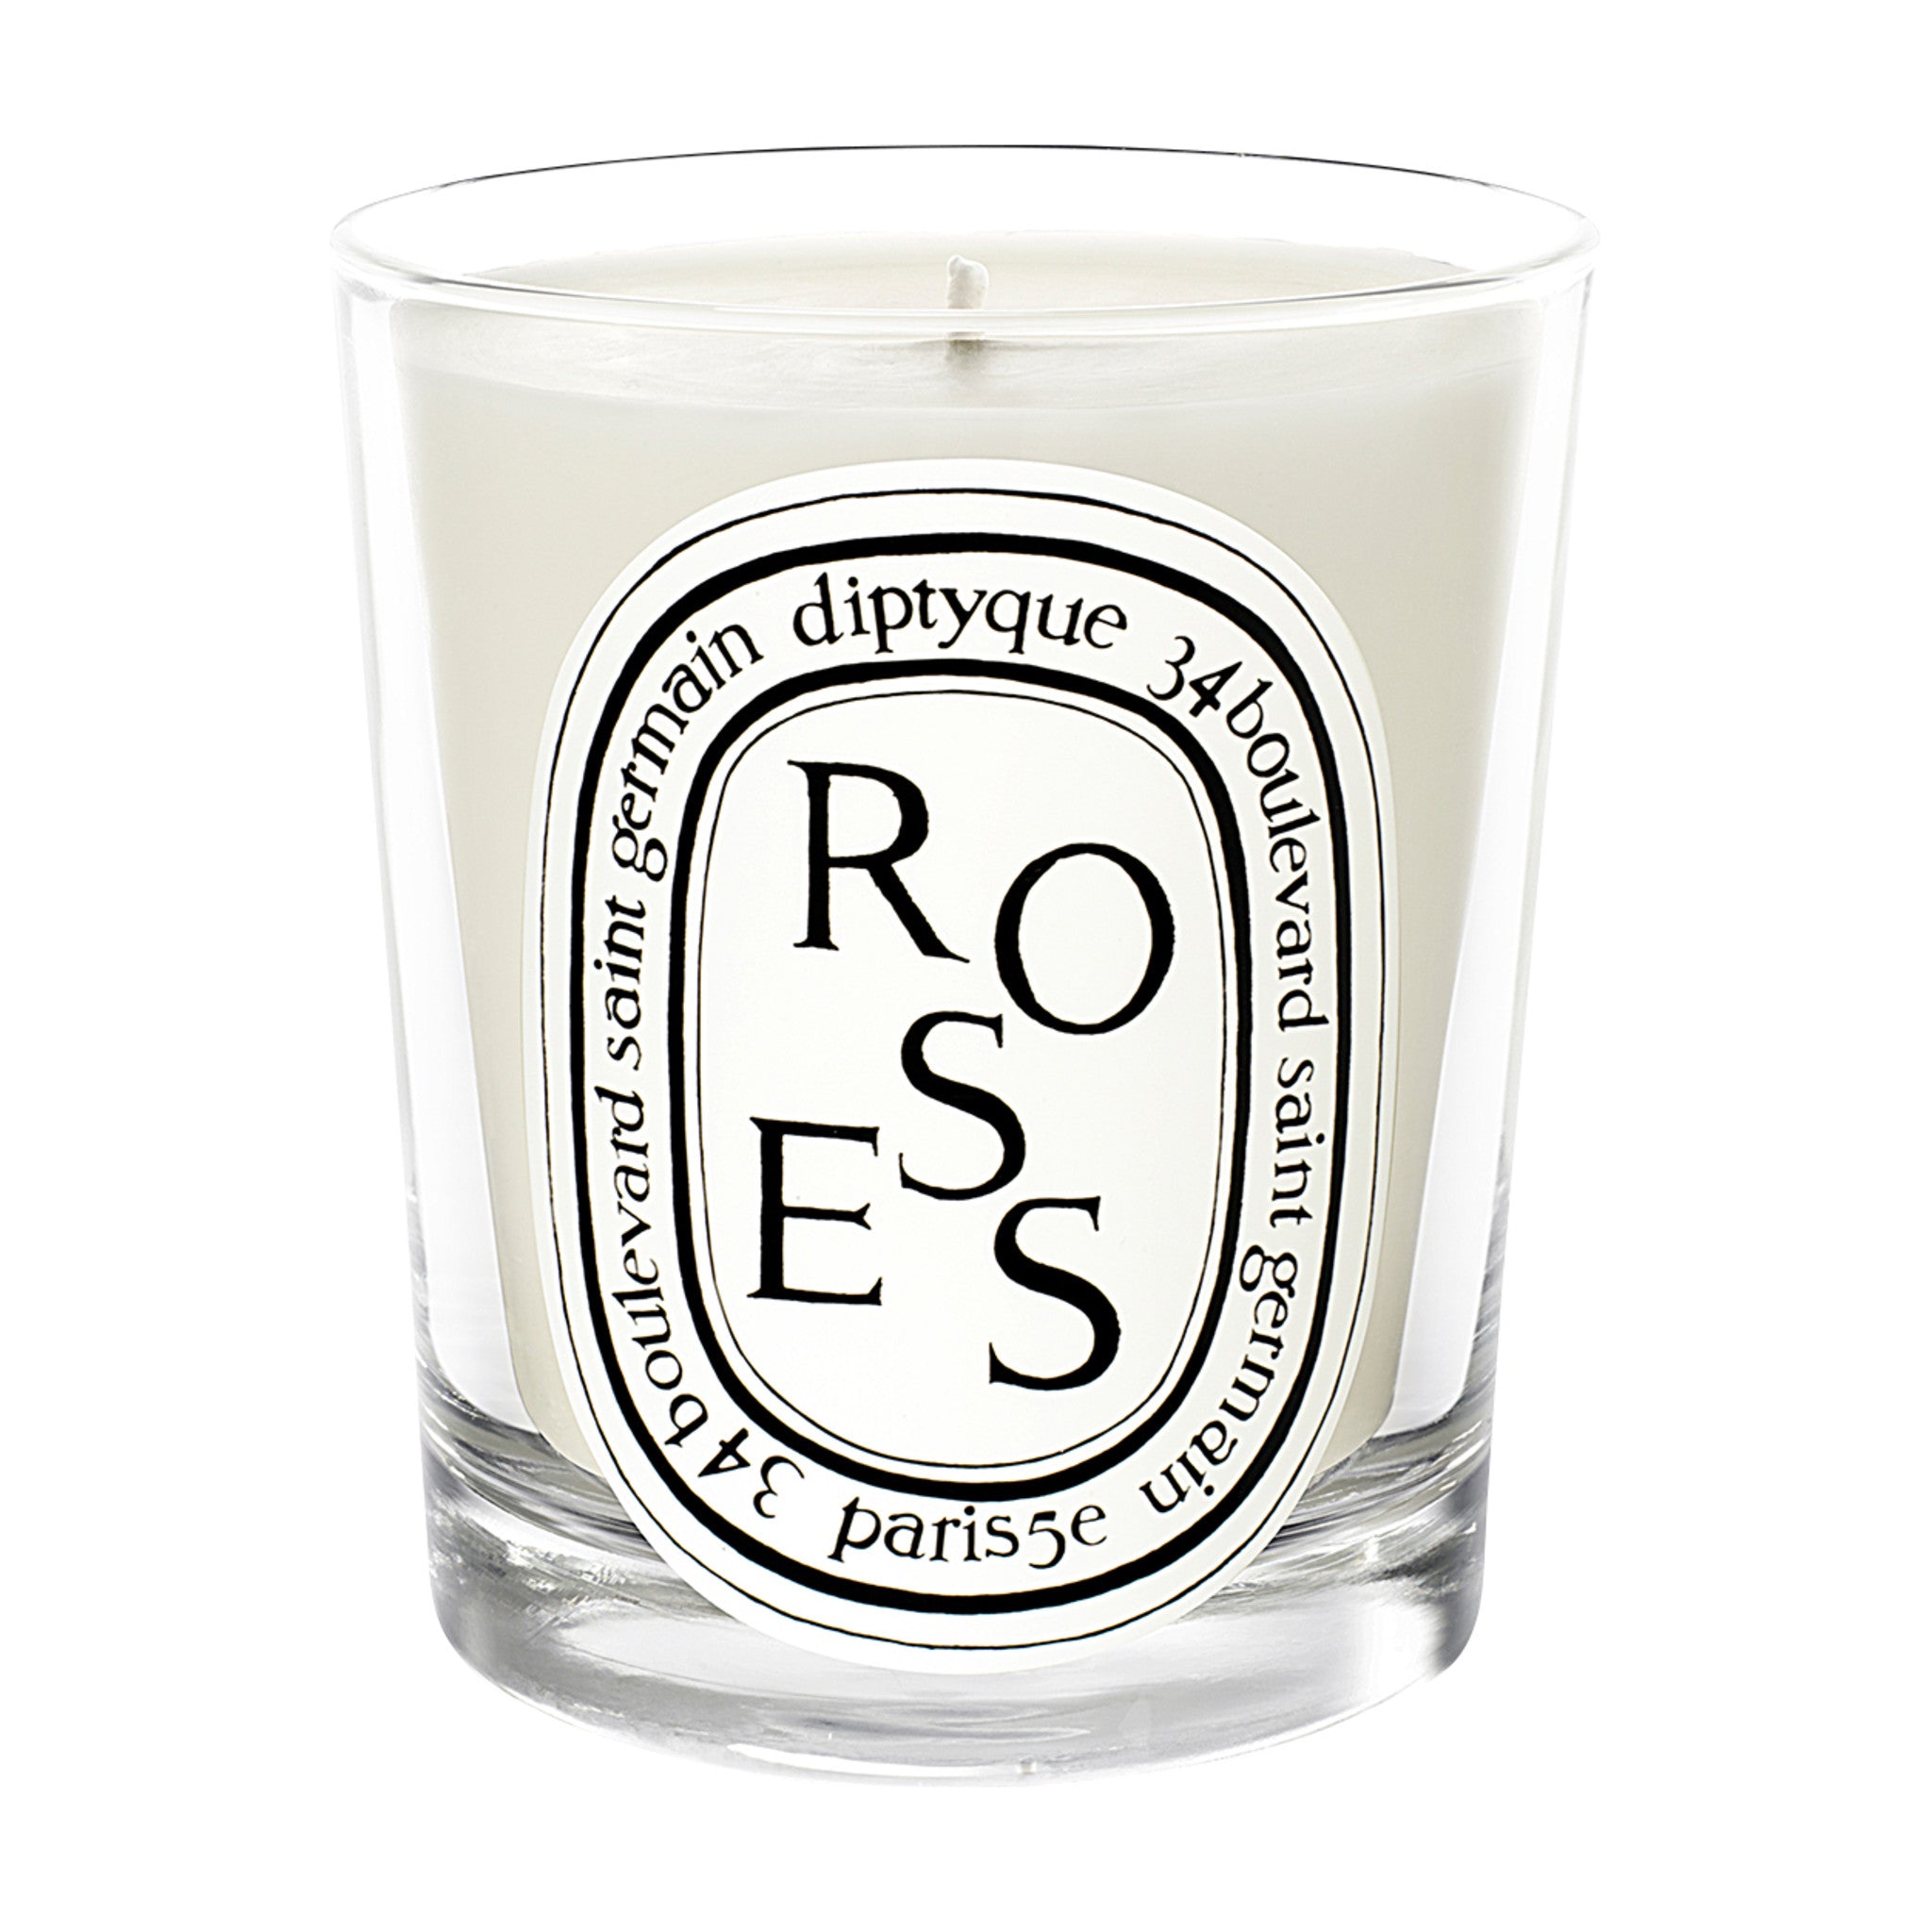 Diptyque Roses Candle main image.